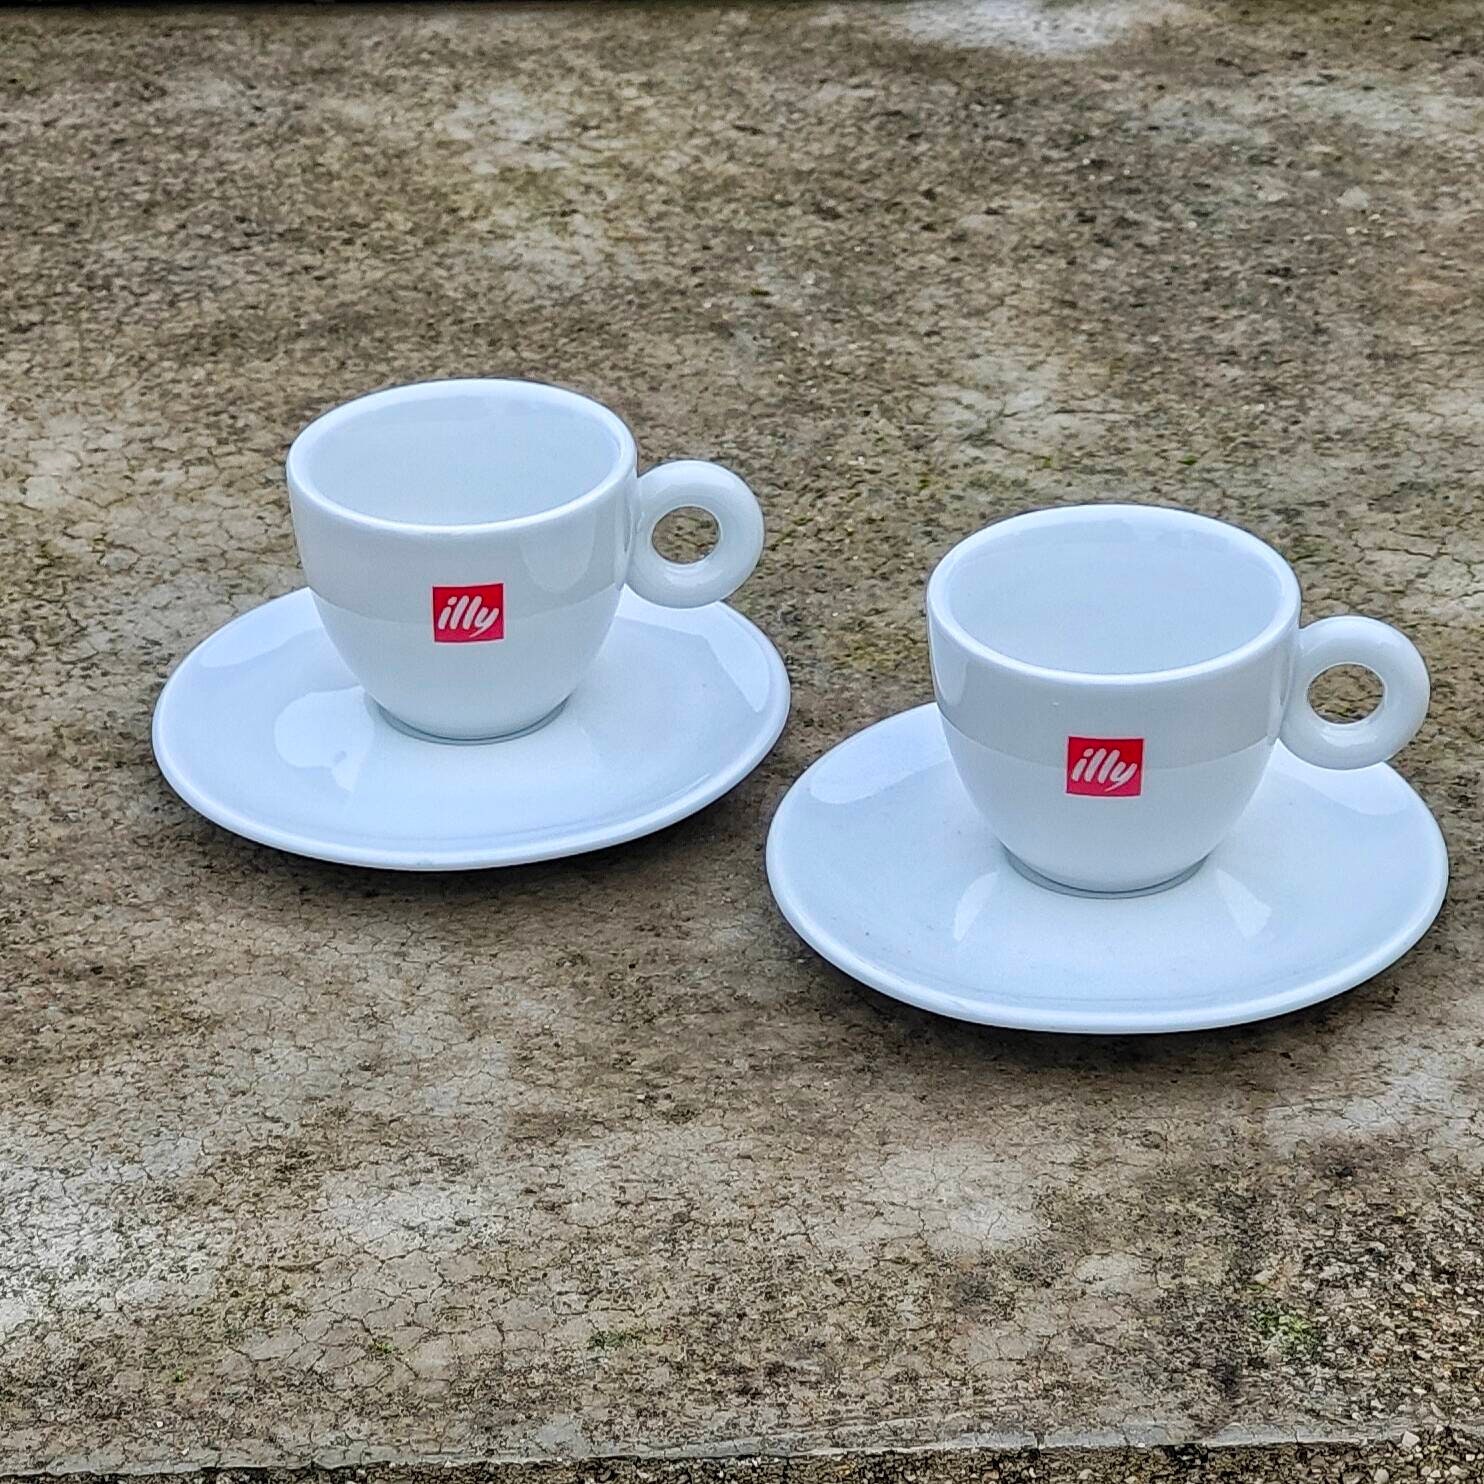 Rufus Willis Illy Cappuccino Cups (Set of 2)